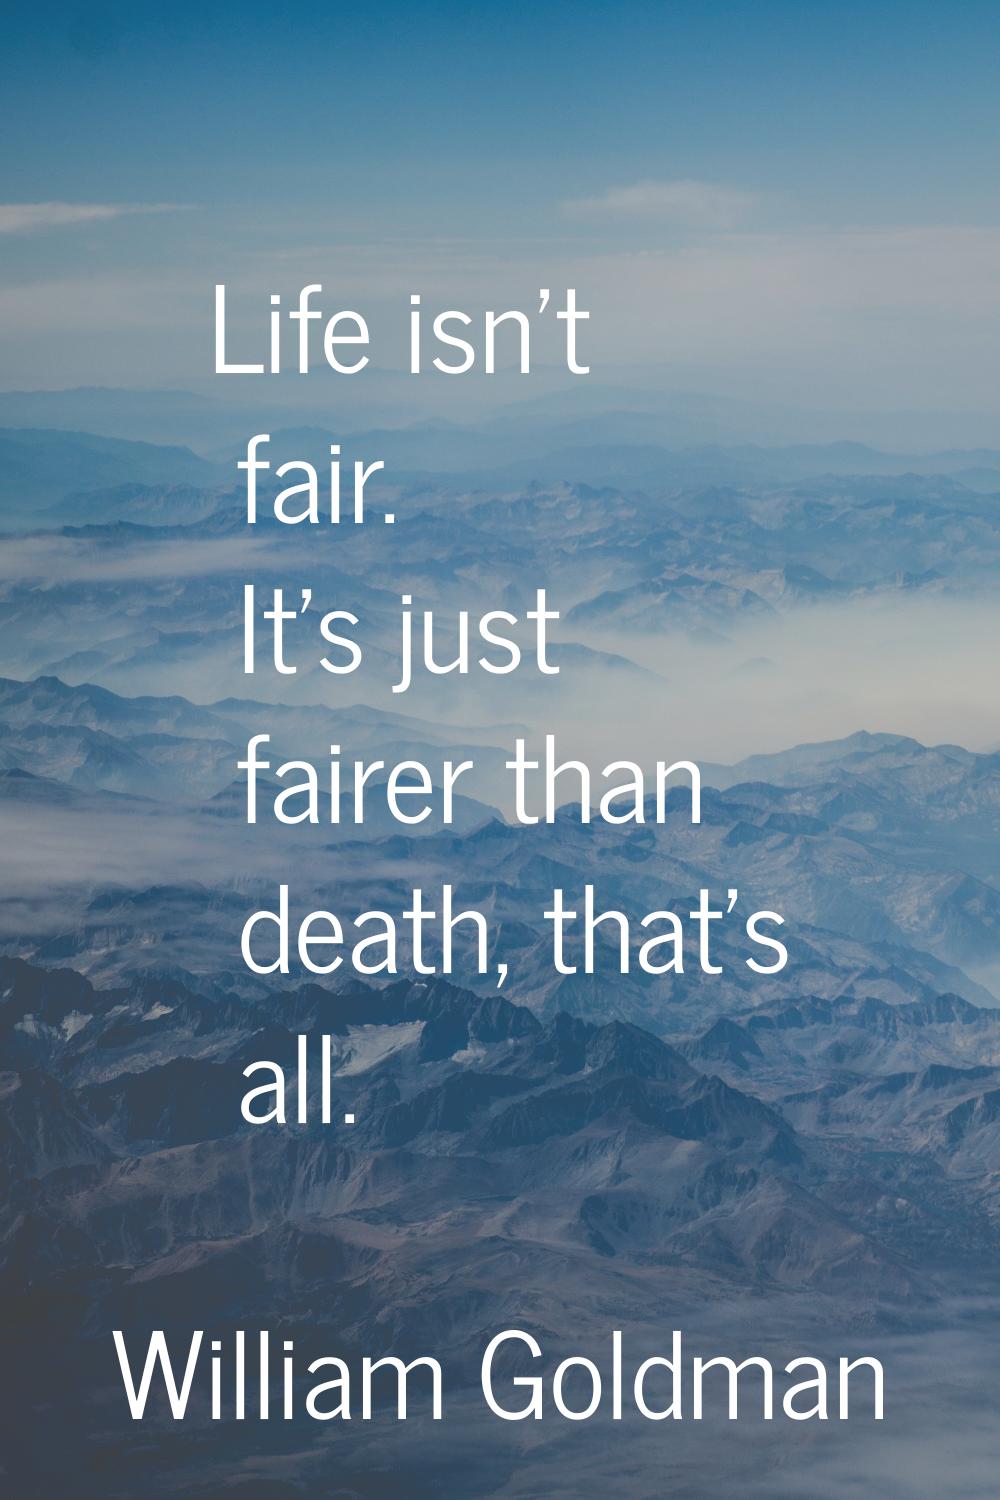 Life isn't fair. It's just fairer than death, that's all.